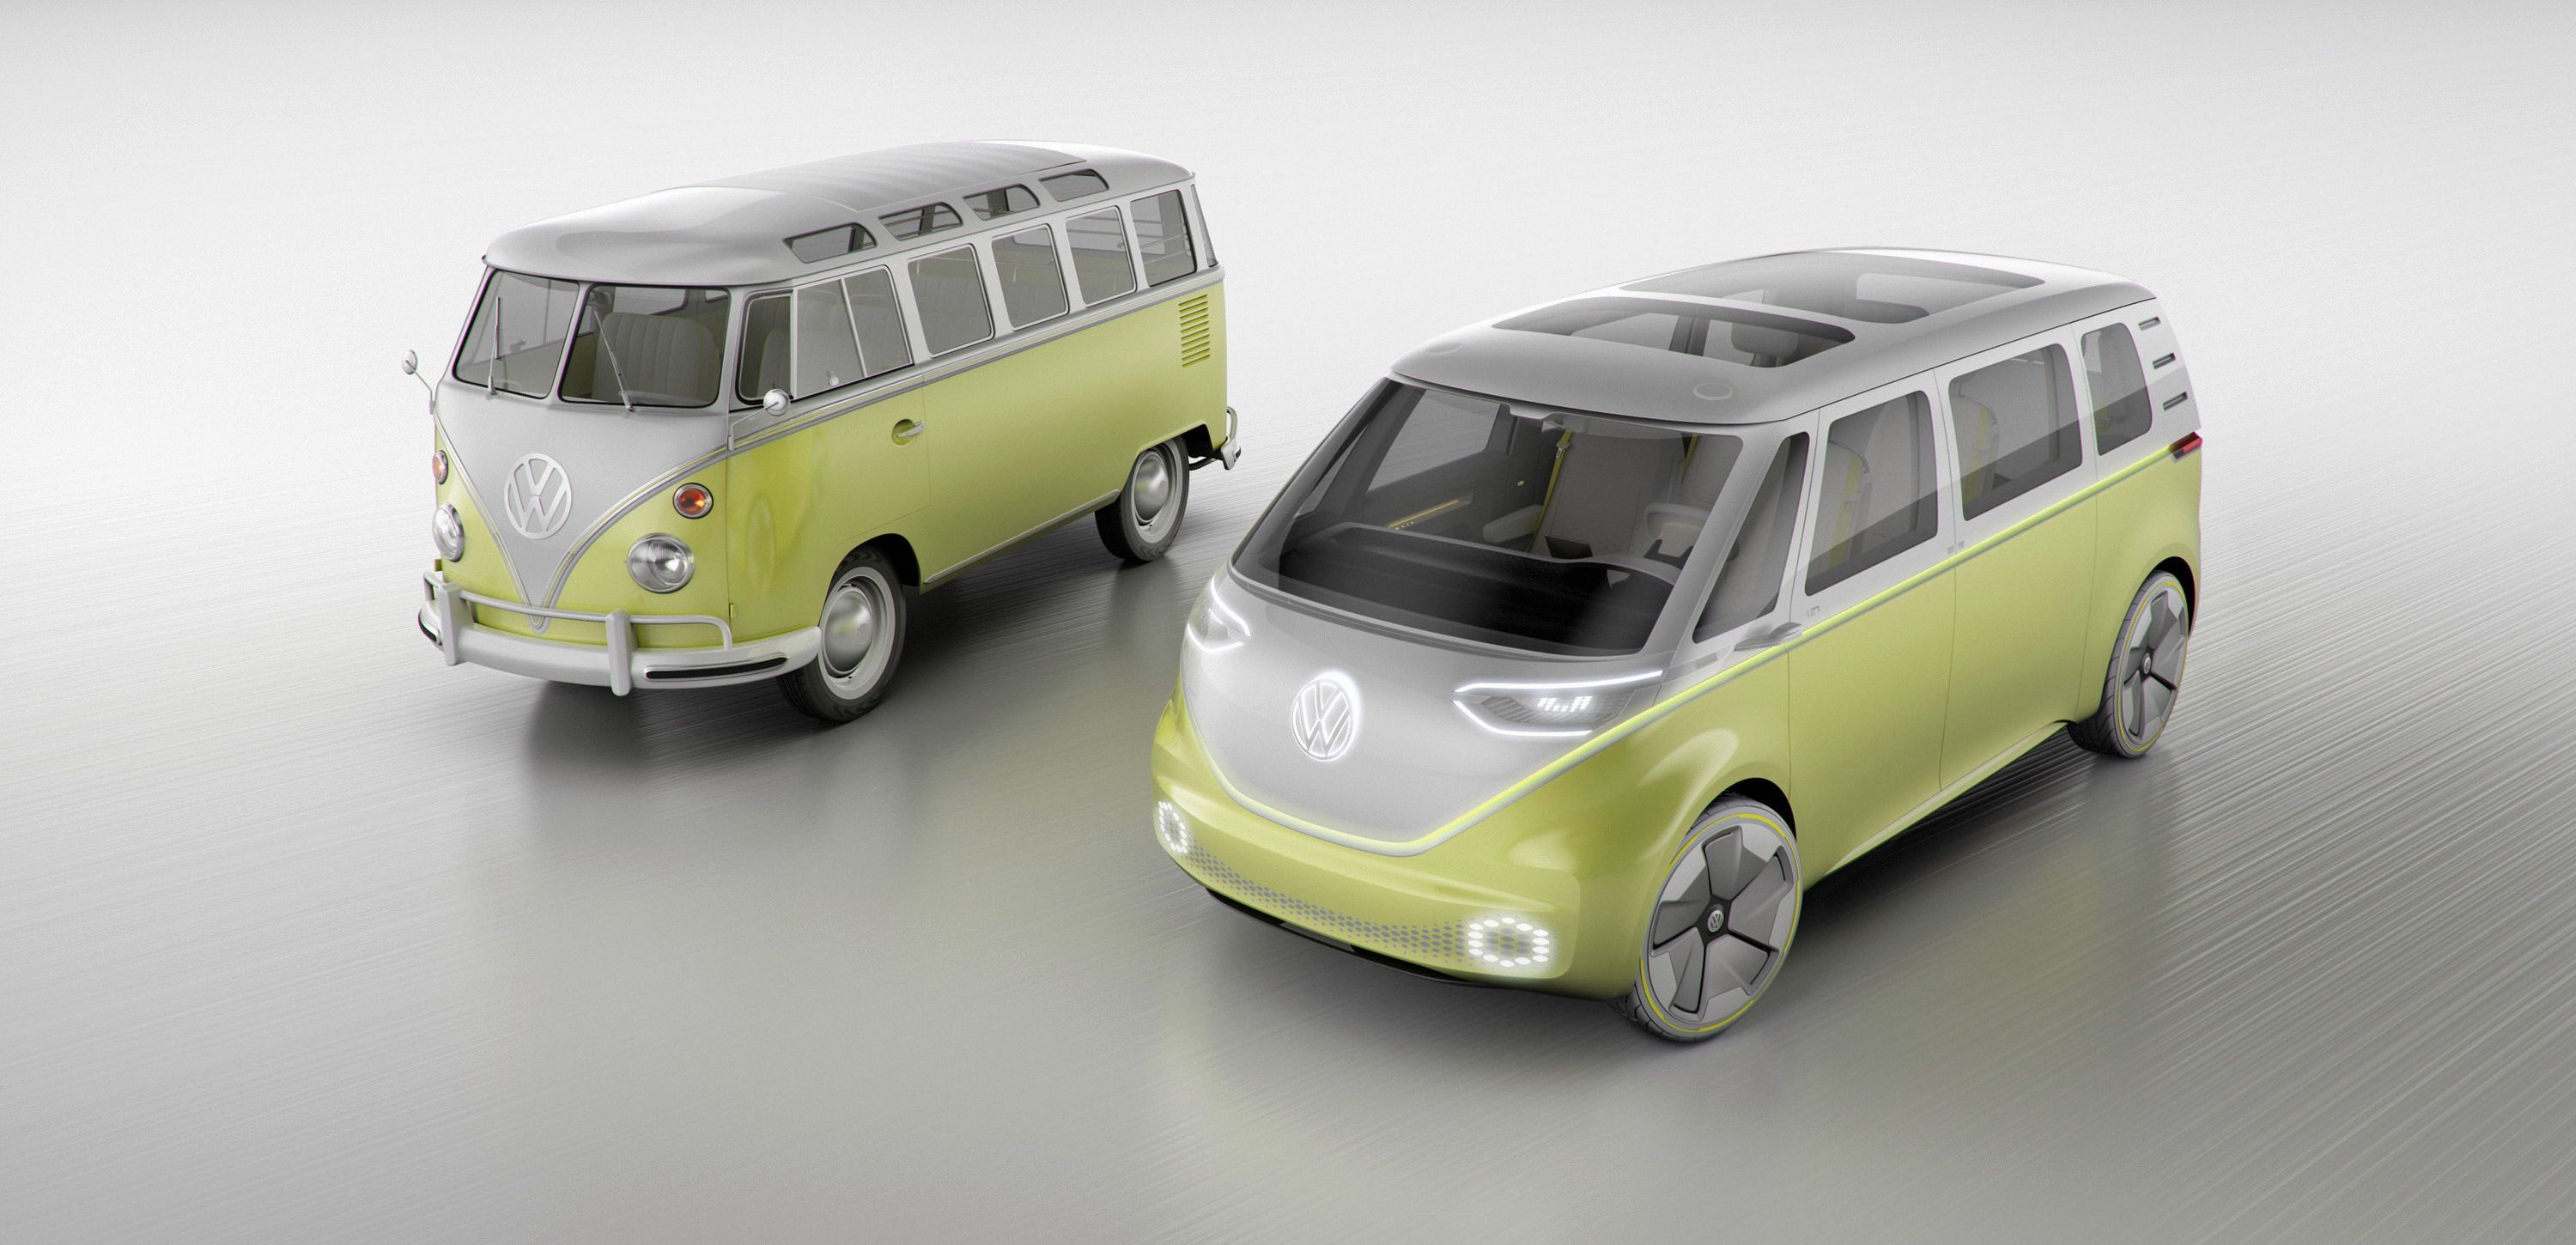 2017 Is It Too Soon To Ask Volkswagen To Build A Production I.D. Buzz Concept?